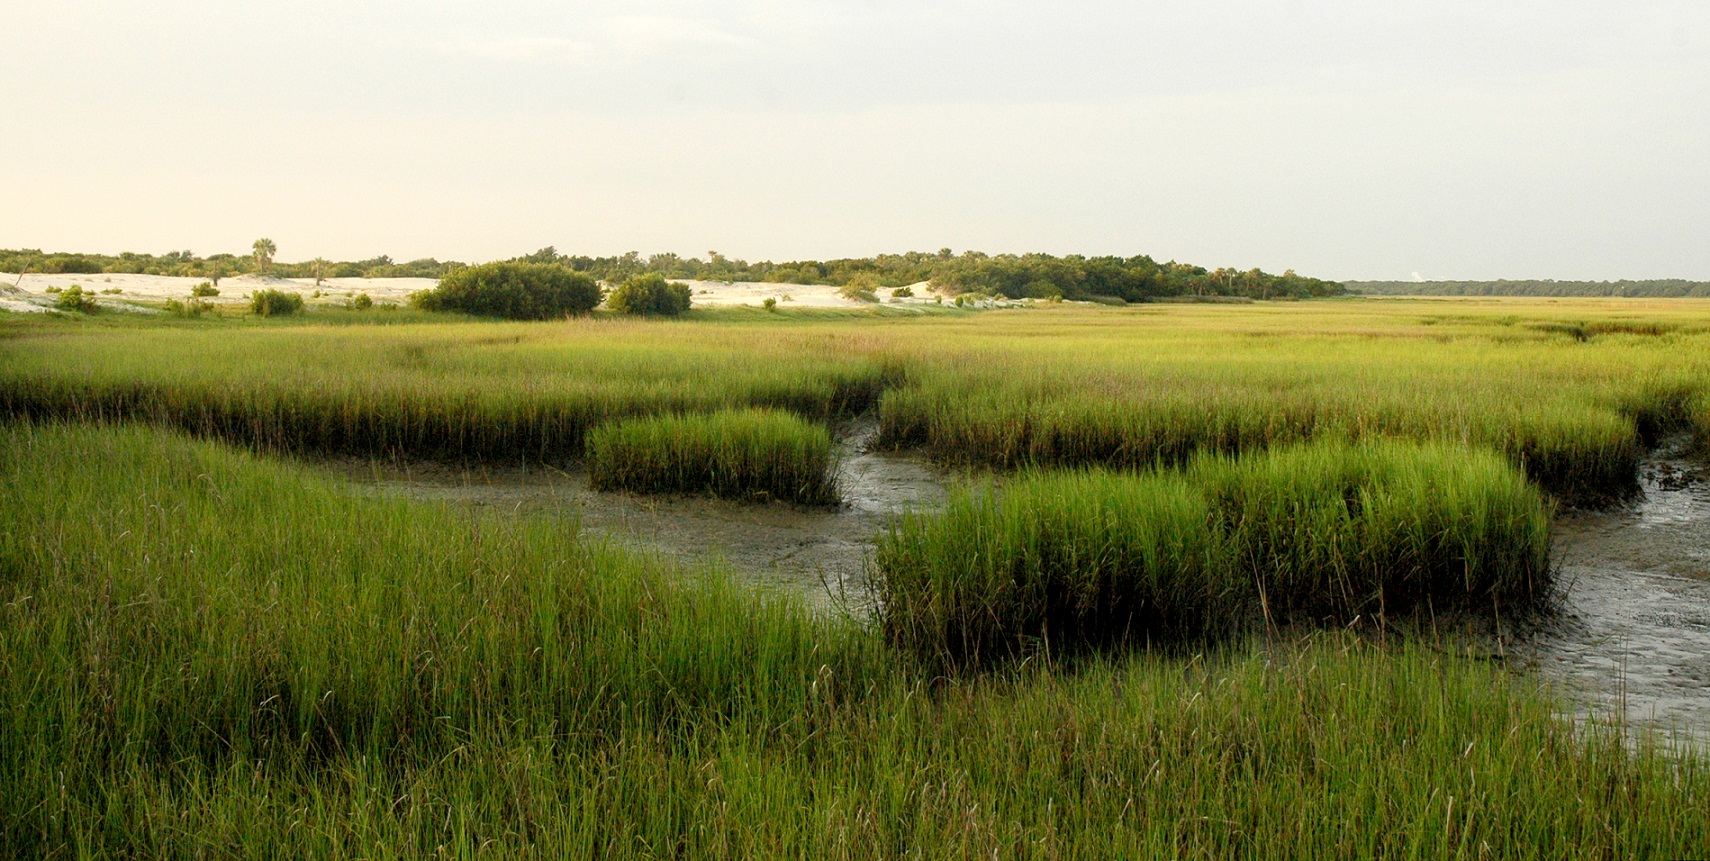 Green salt marsh grasses in the foreground with beach in the background.